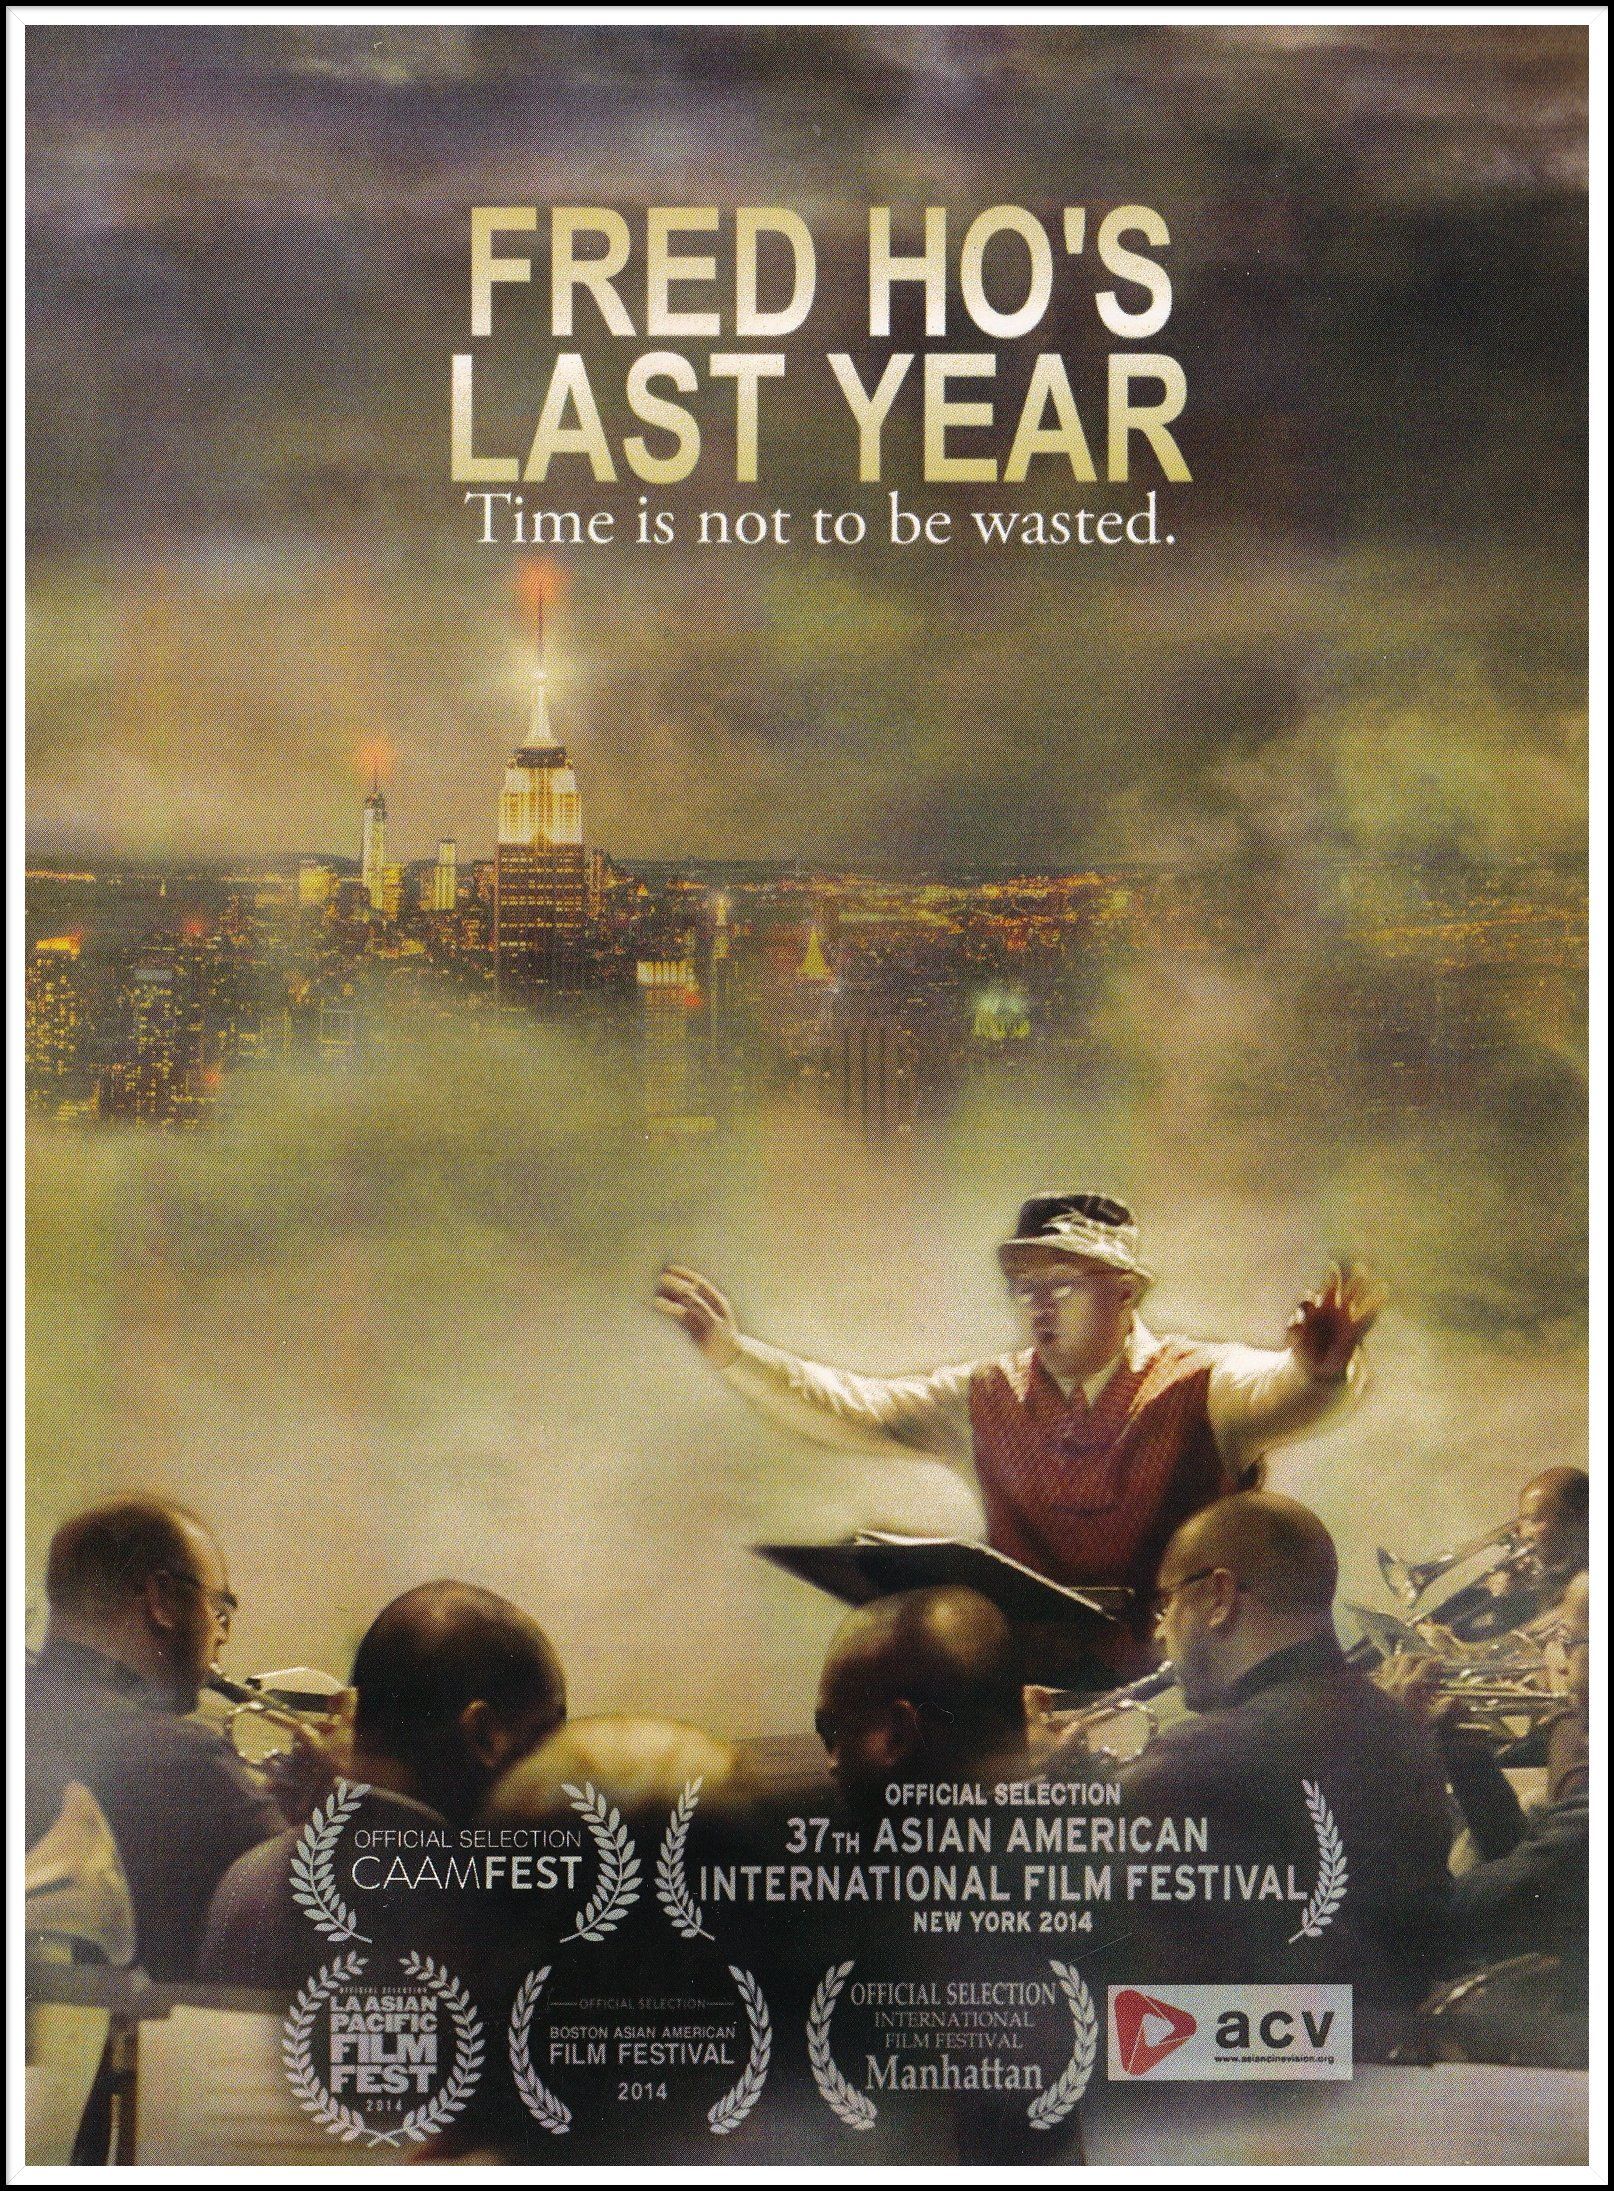 Fred Ho's Last Year film poster